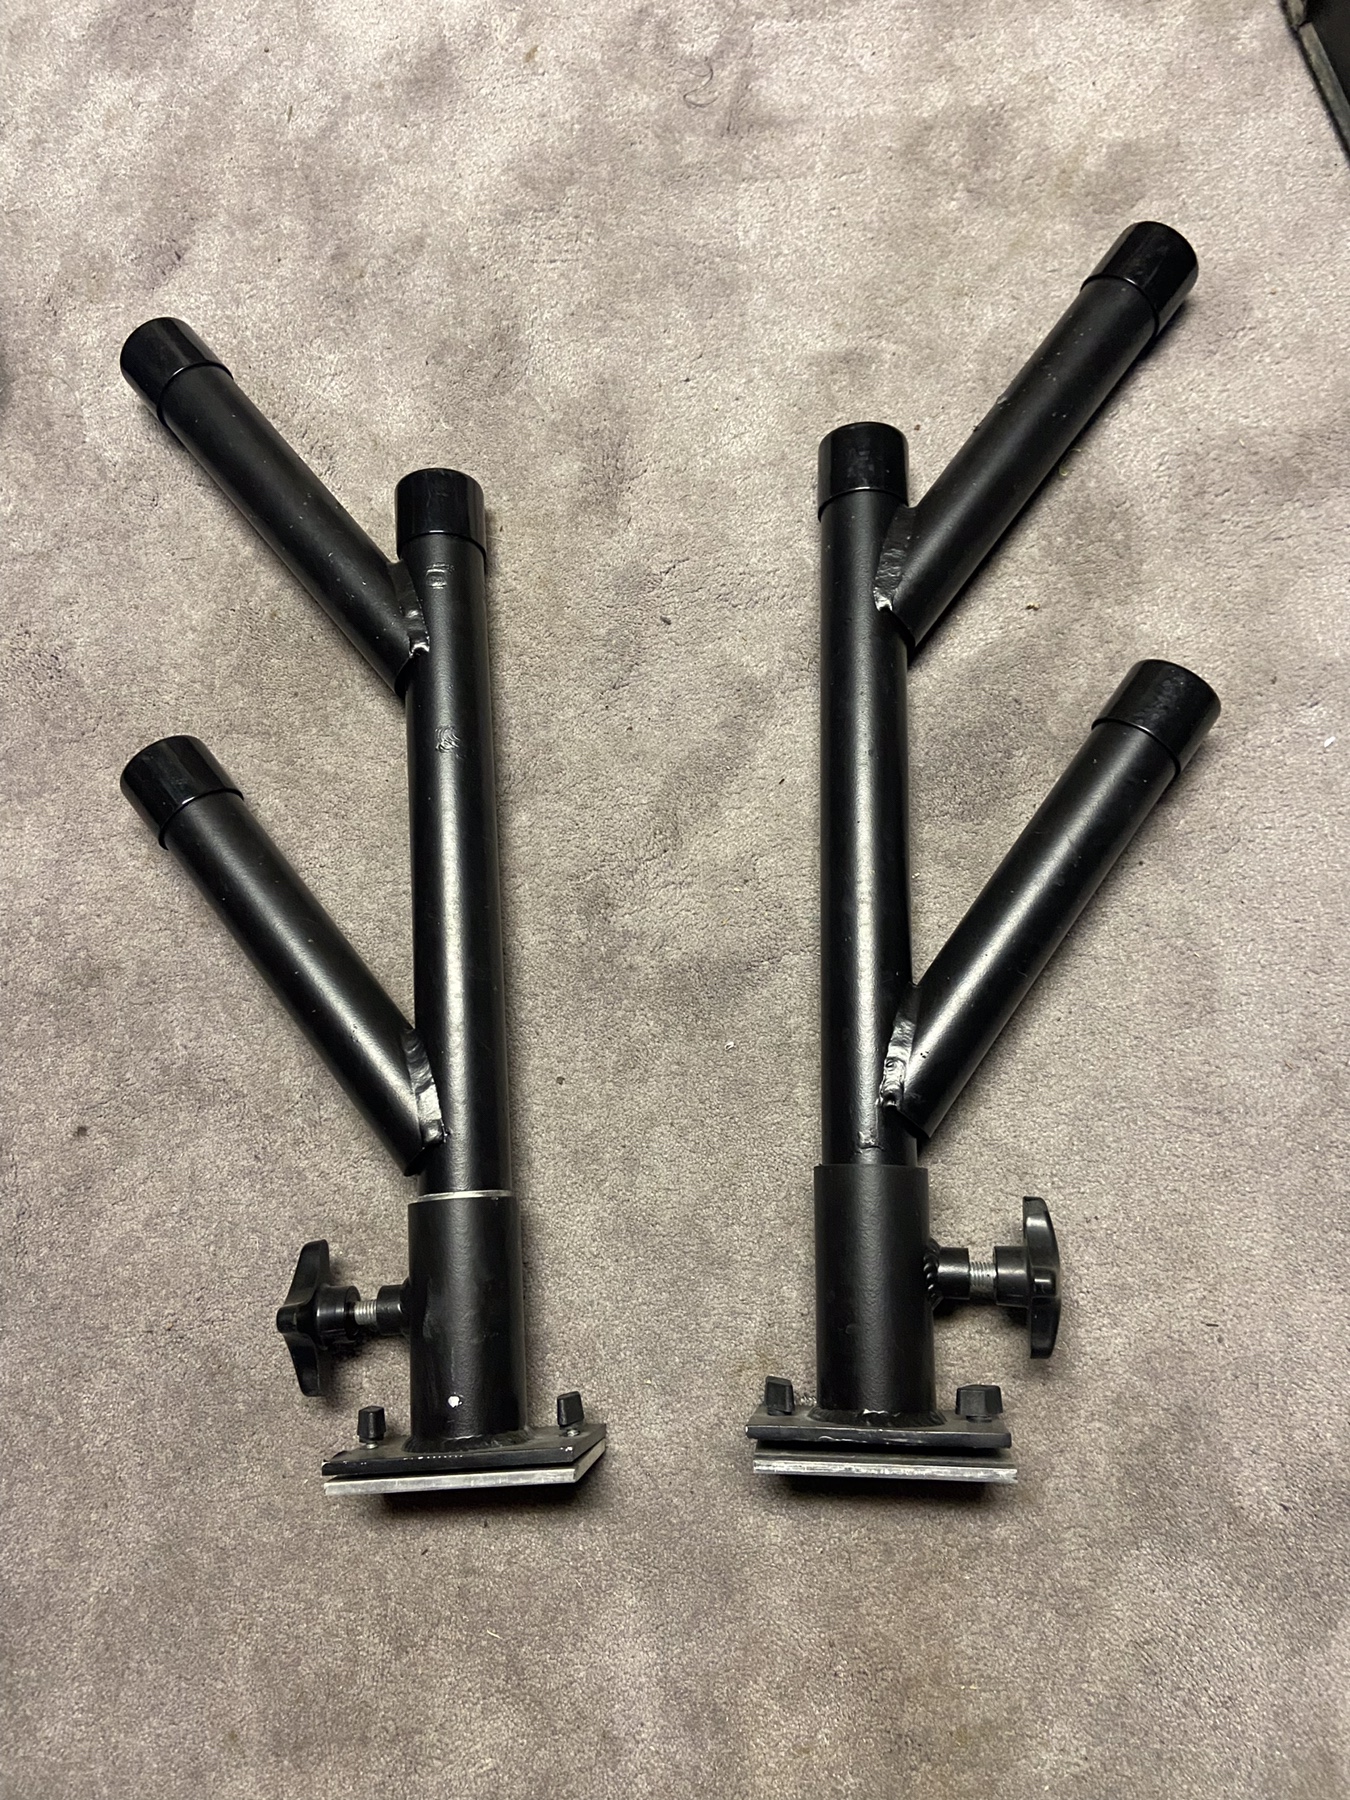 Rocket launcher rod holders for sale - Classifieds - Buy, Sell, Trade or  Rent - Lake Erie United - Walleye, Bass, Perch Fishing Forum